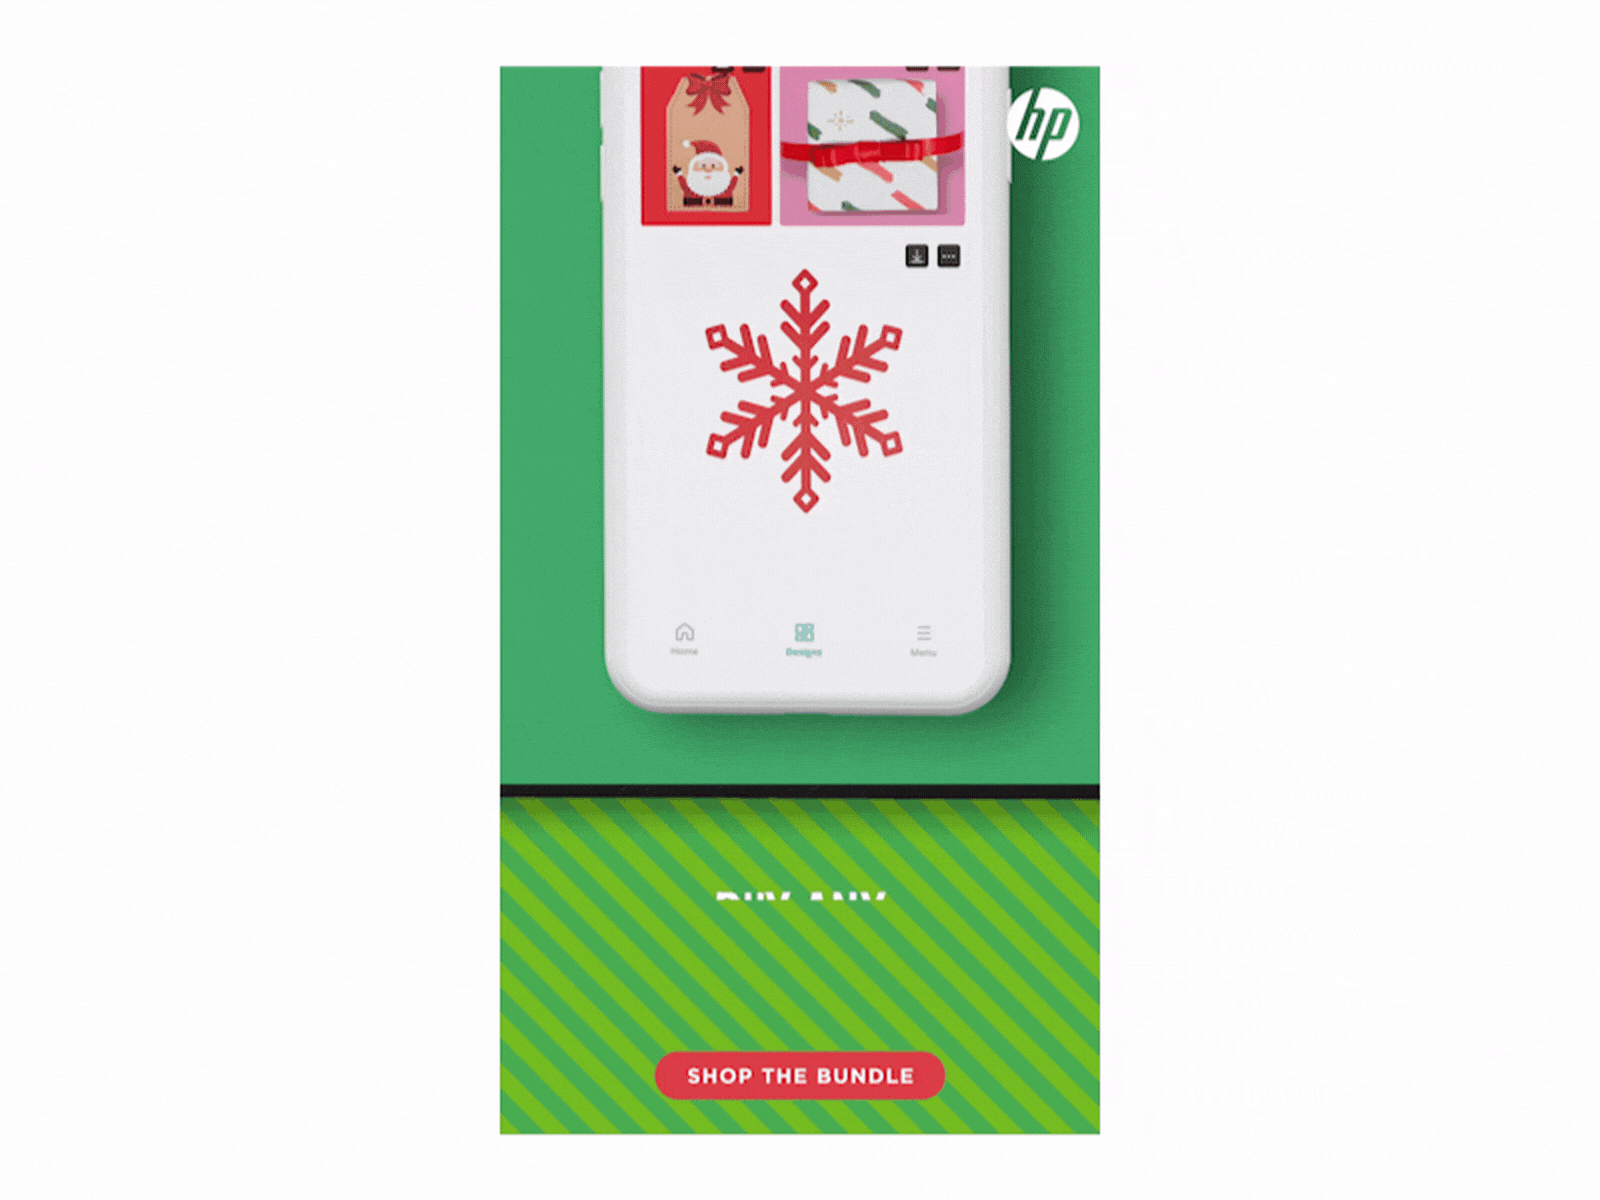 HP/Canva Holiday concept